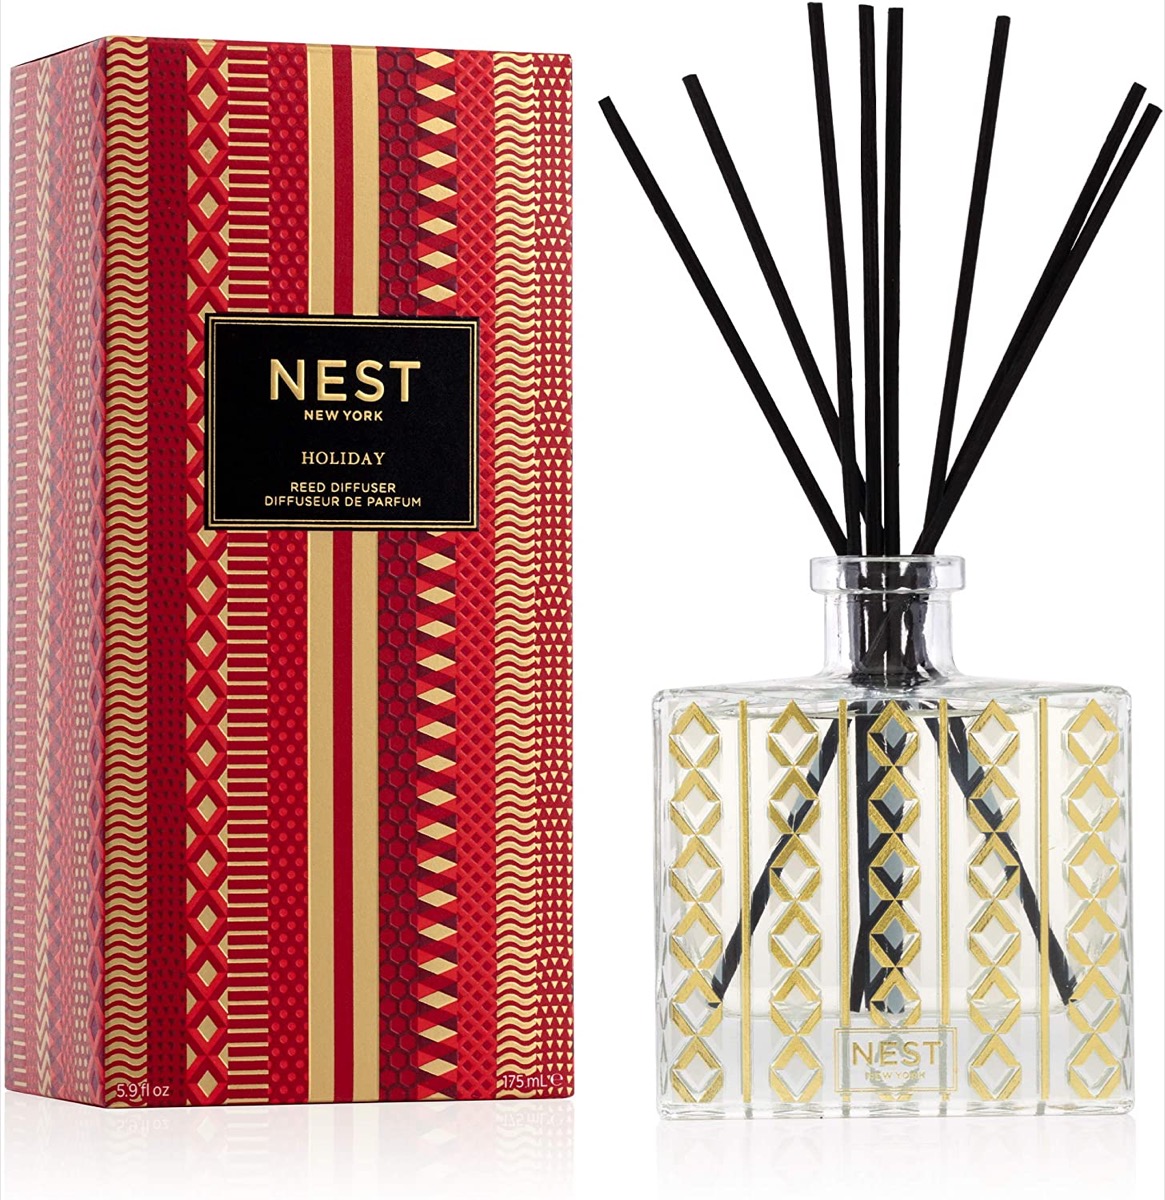 nest reed diffuser and red box